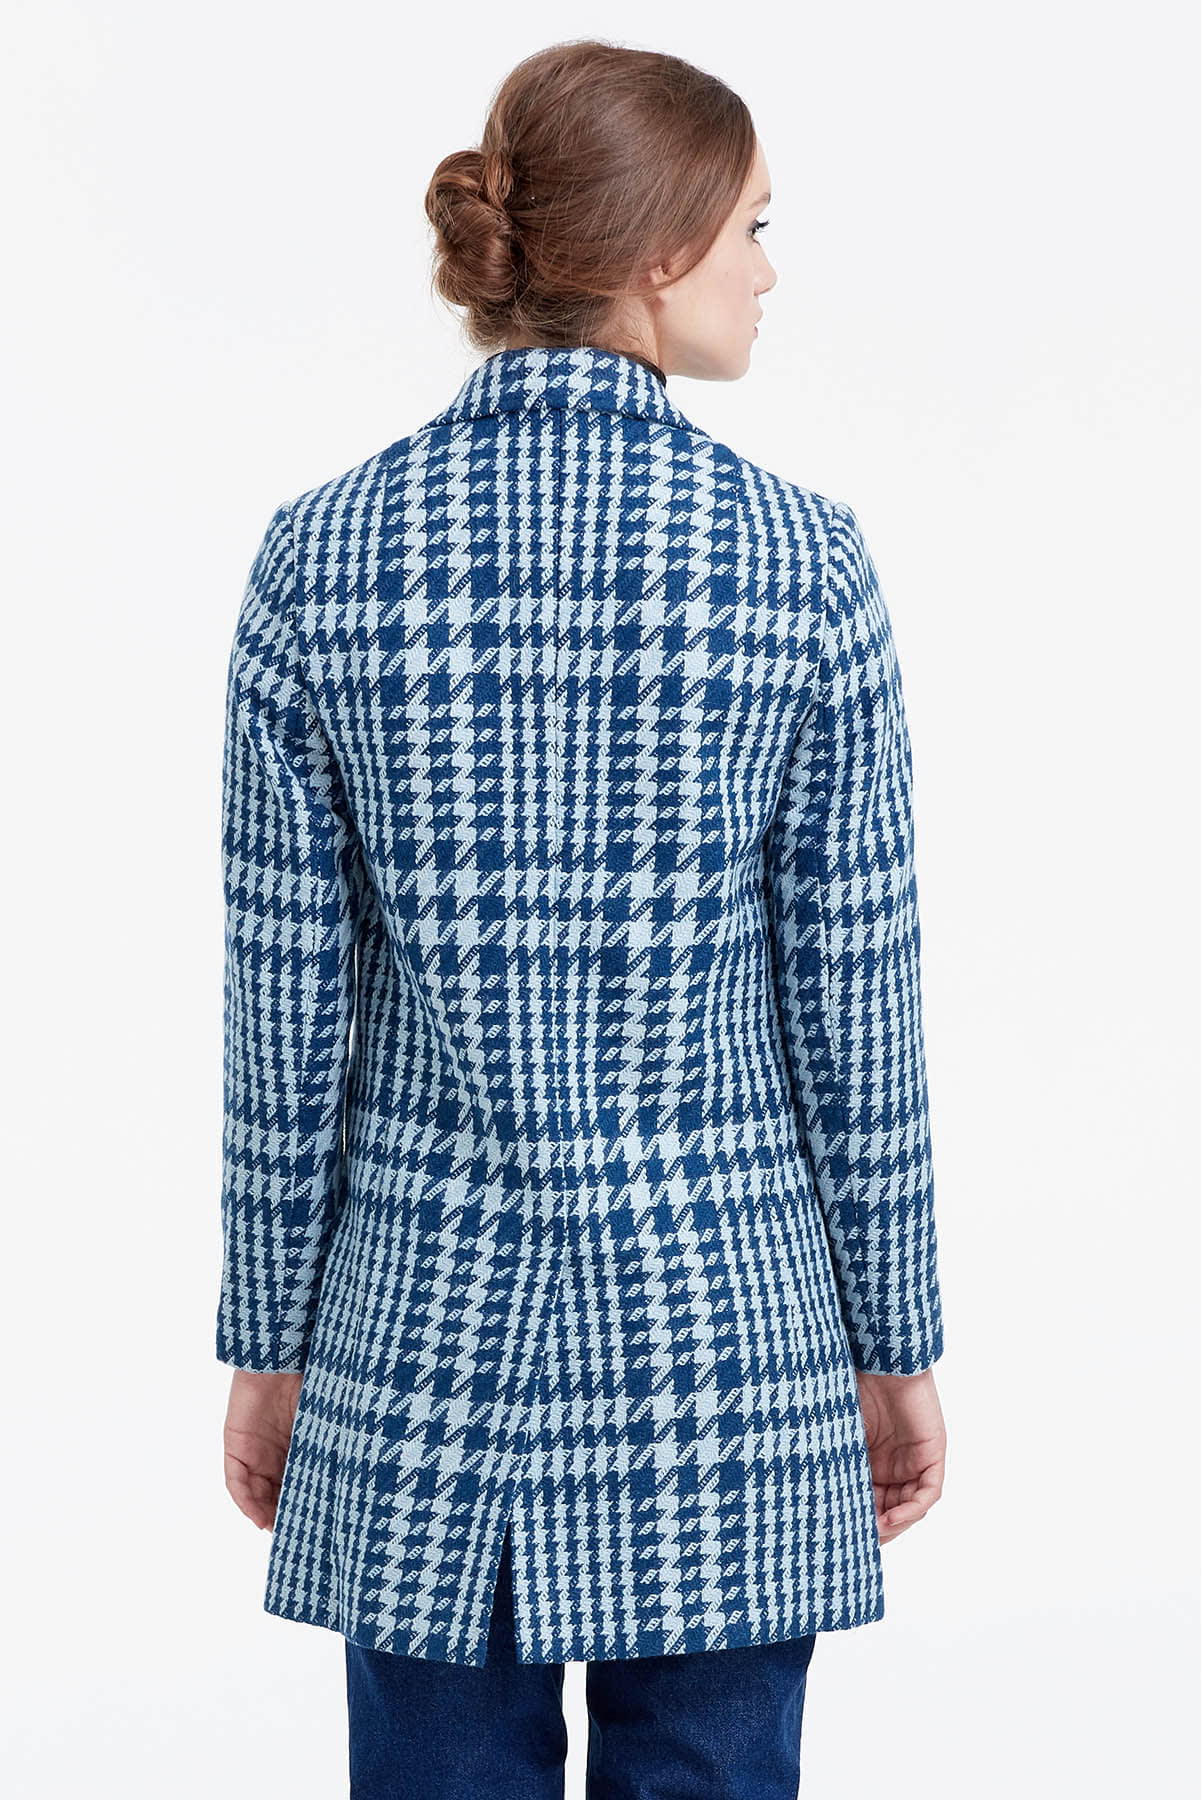 Long double-breasted jacket with a houndstooth print, photo 4